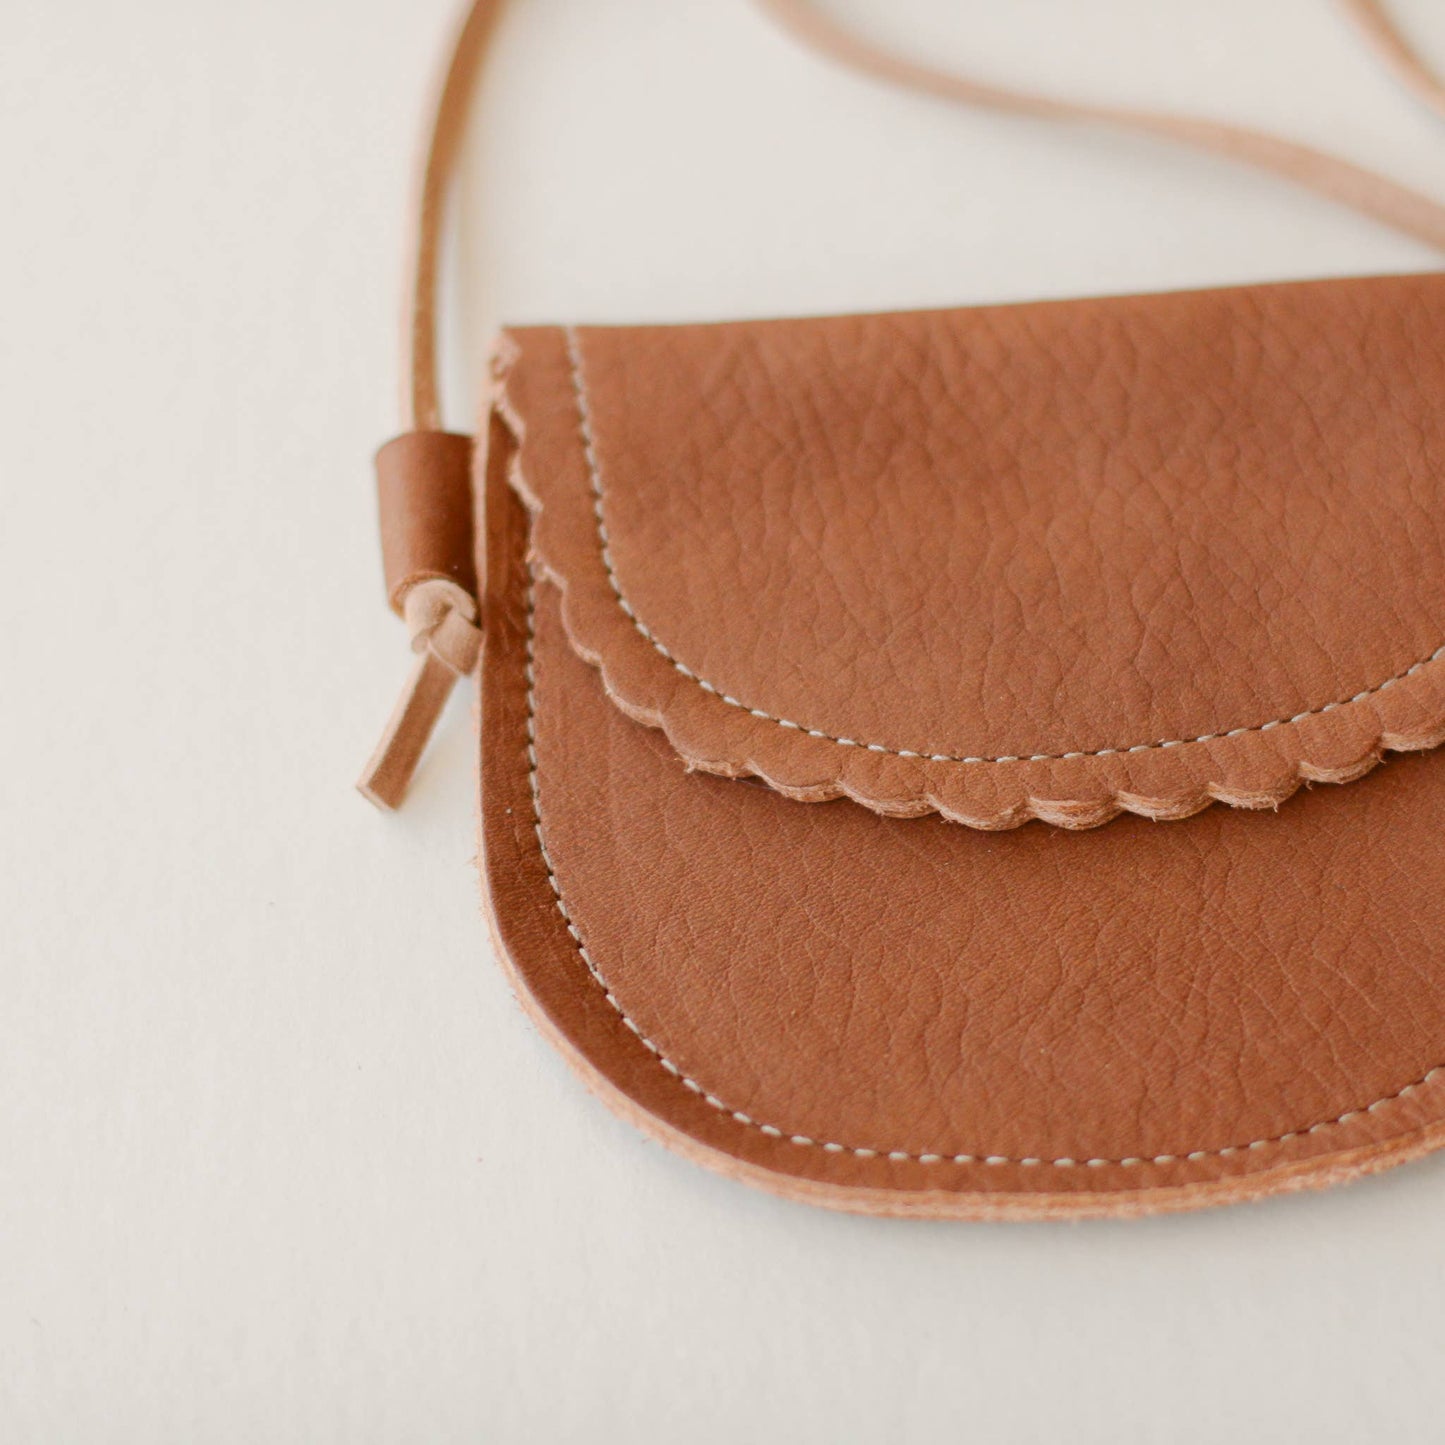 Toddler Scalloped Leather Purse in Walnut